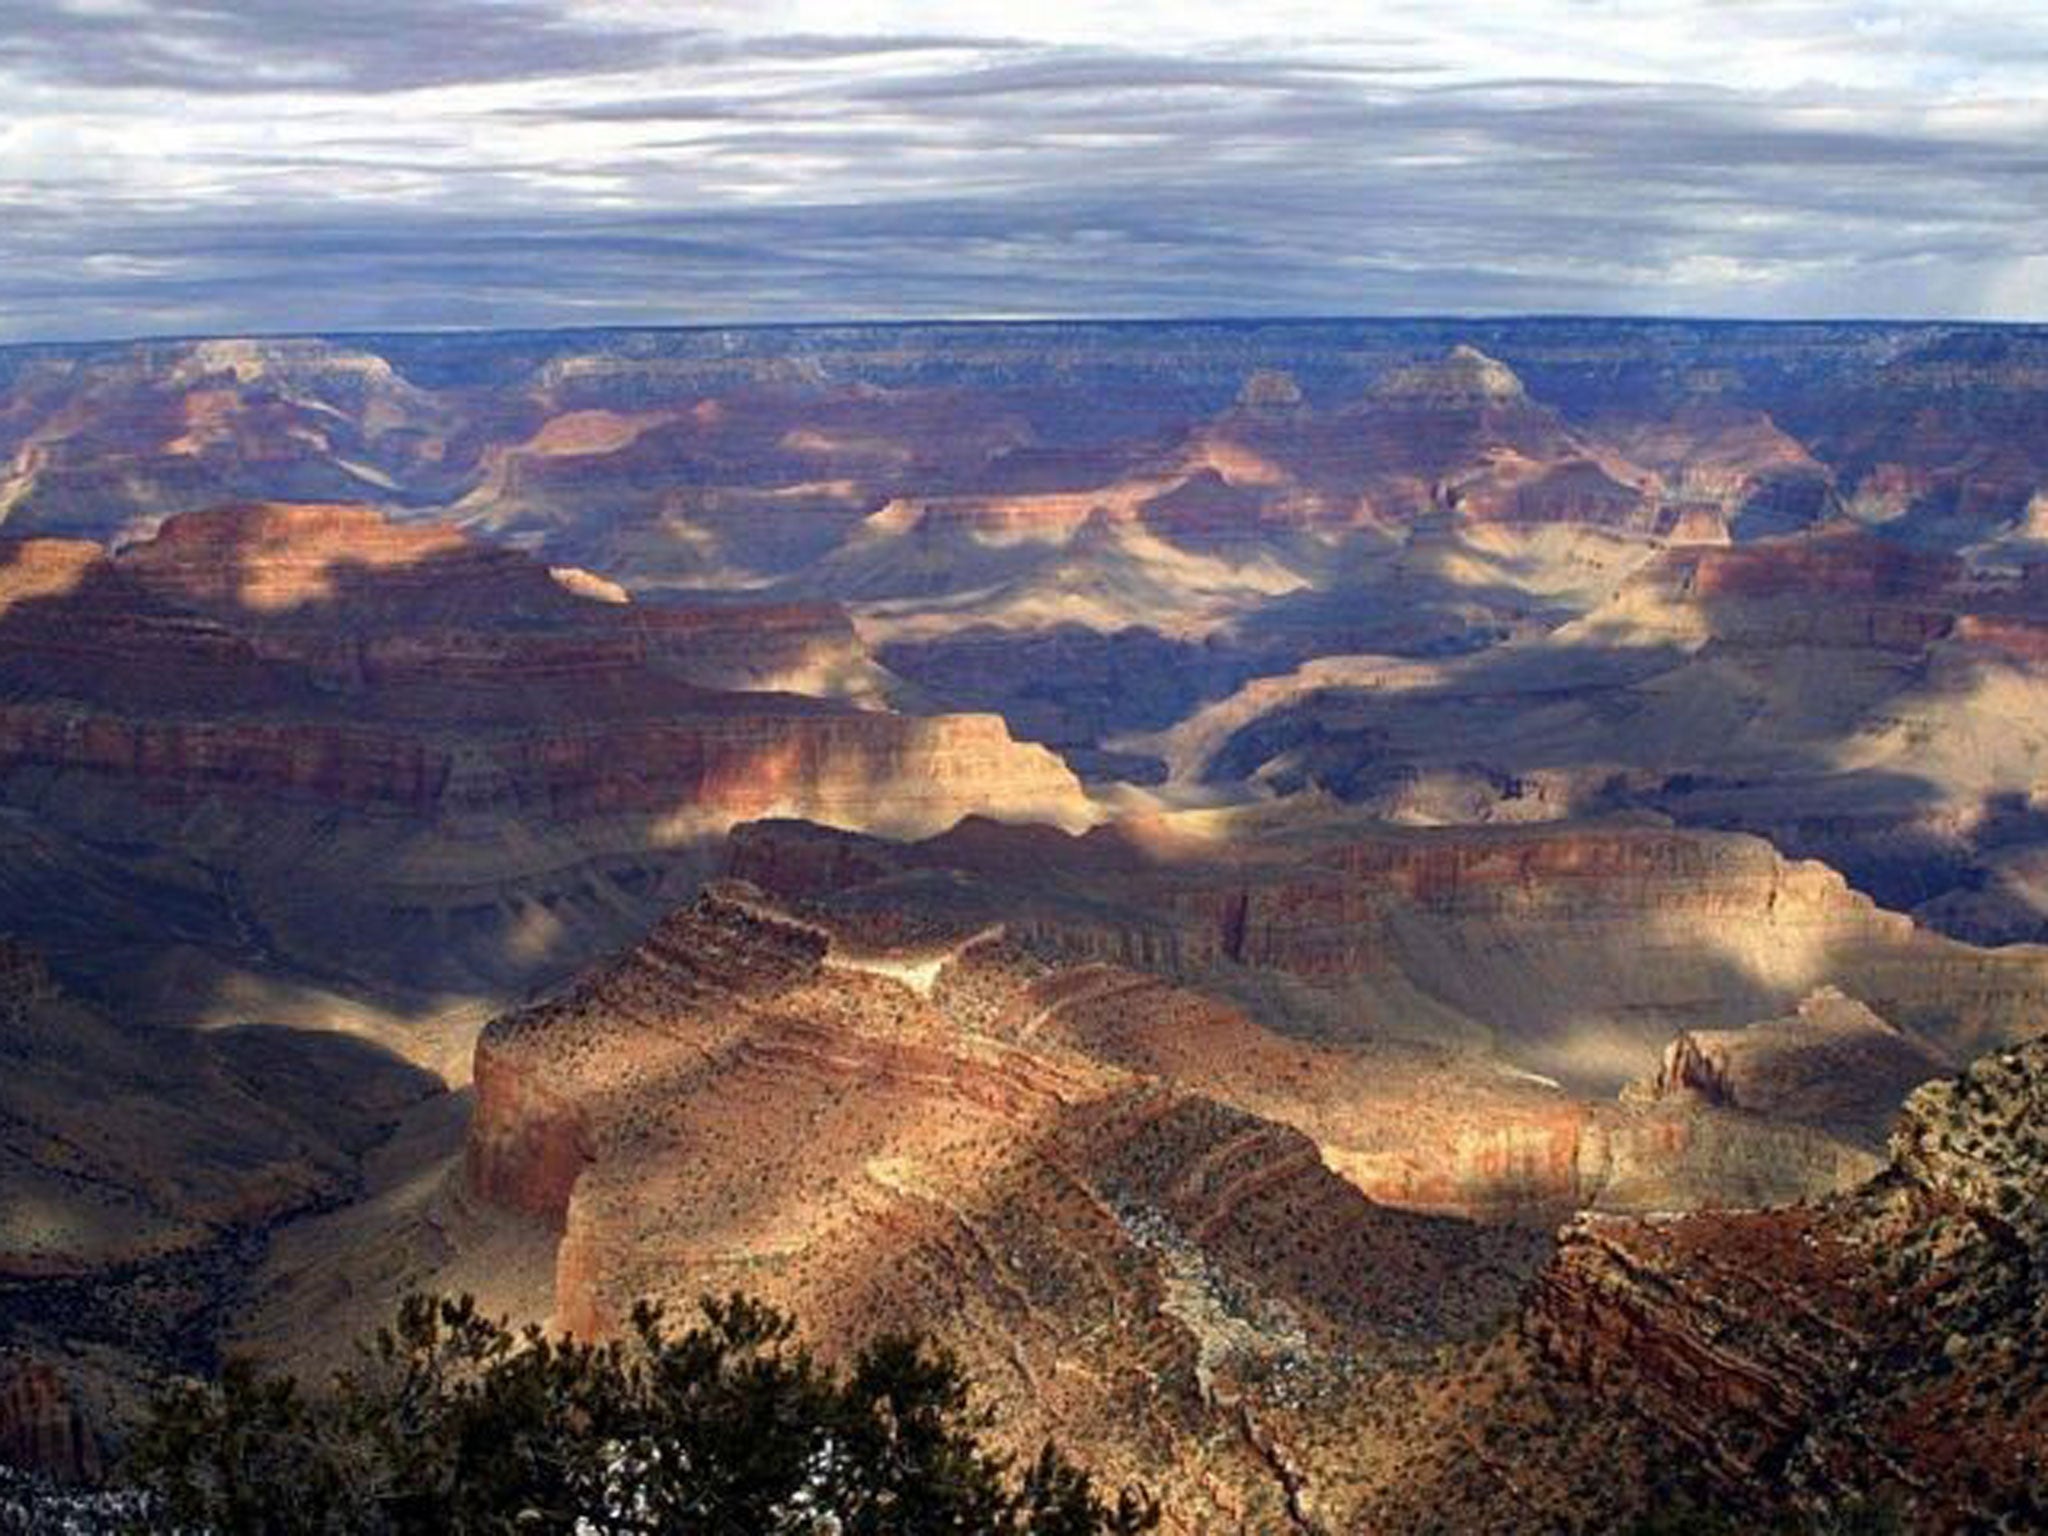 Test subjects were more likely to say they had faith in a higher power after watching 'jaw-dropping' footage of the Grand Canyon